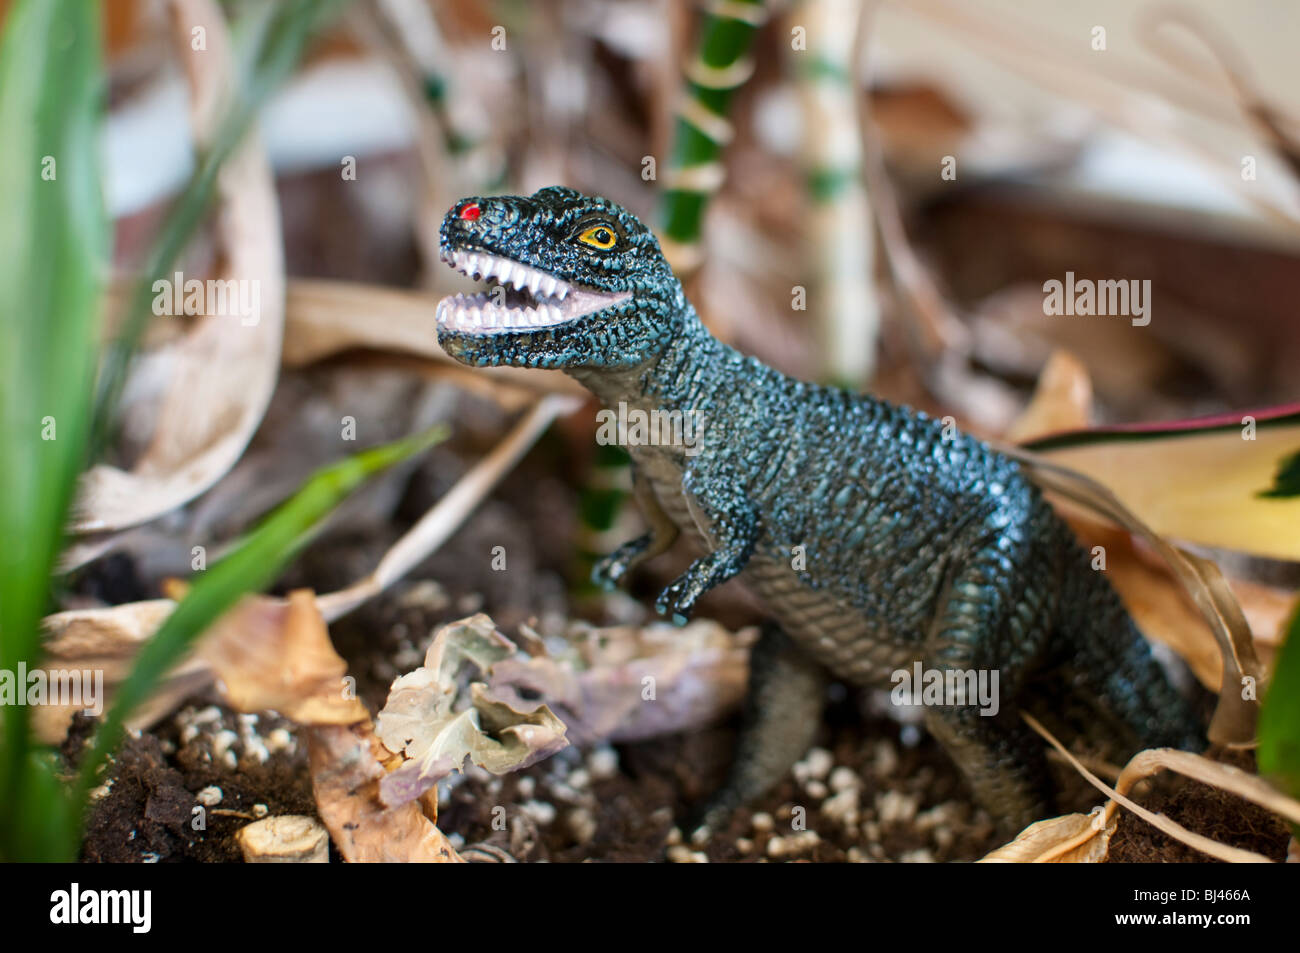 Plastic toy T Rex Dinosaur with plants in background Stock Photo